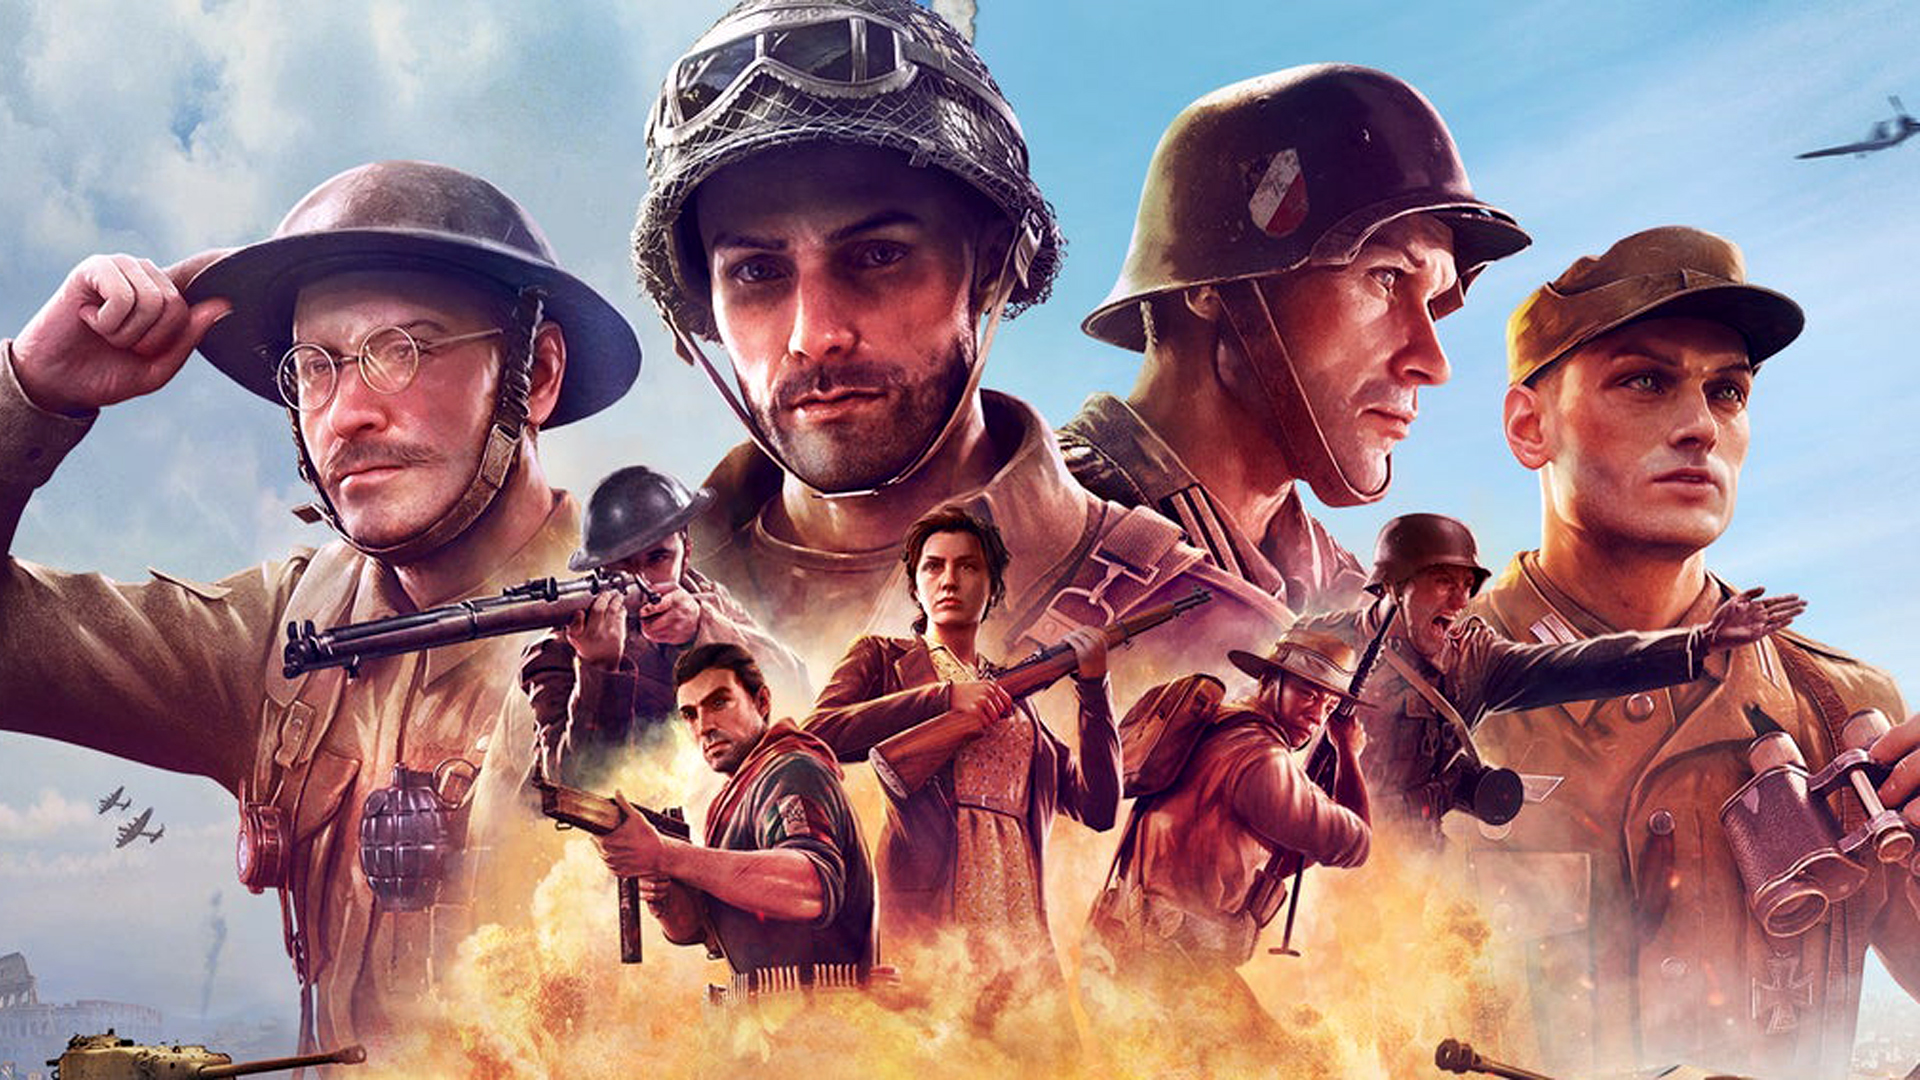 Company of Heroes 3’s story will change based on your actions, The Witcher-style